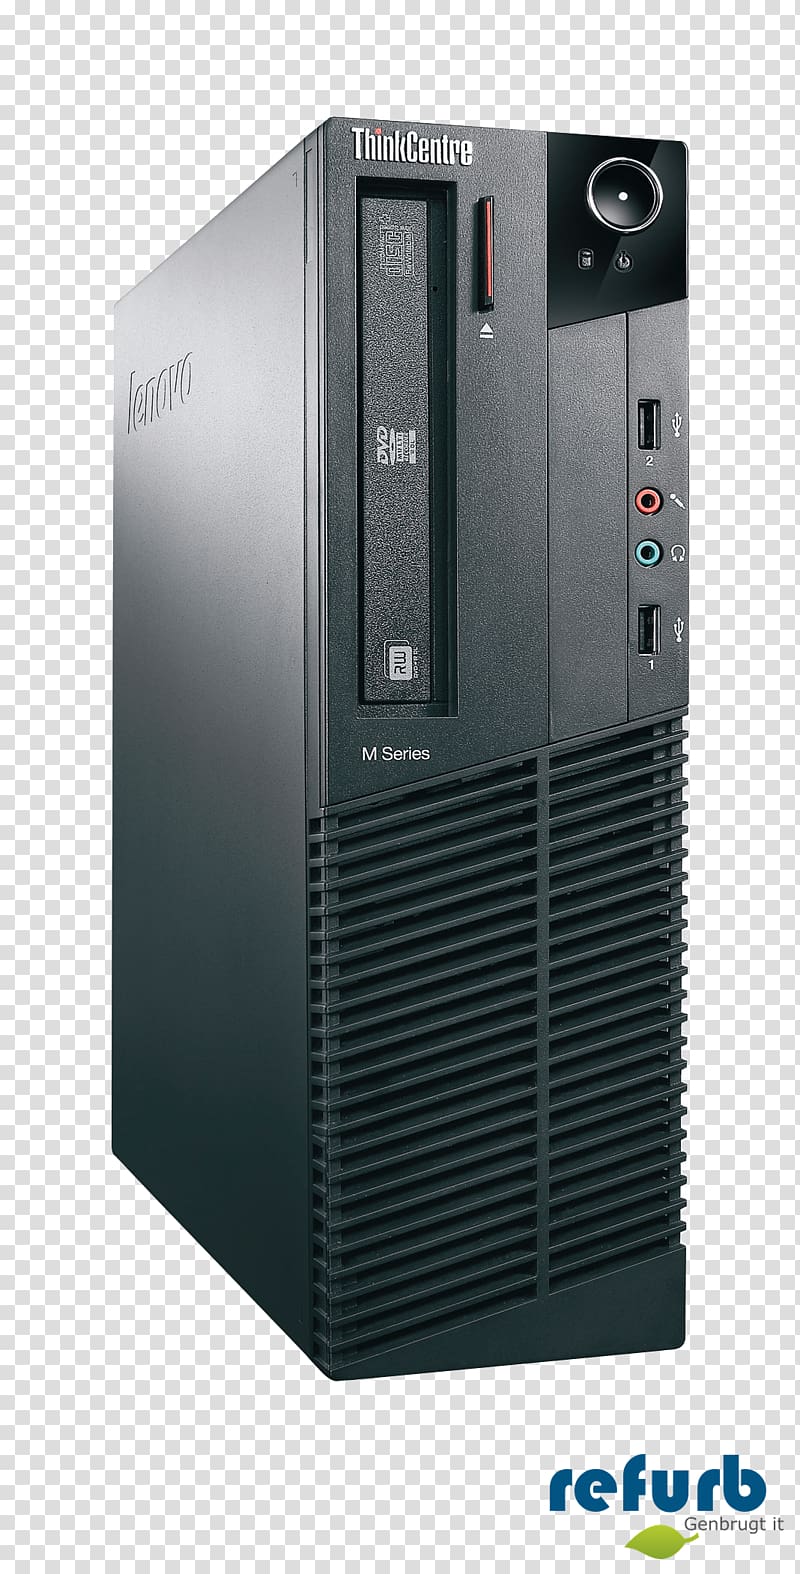 Small form factor ThinkCentre Intel Core i5 Lenovo, ram god transparent background PNG clipart